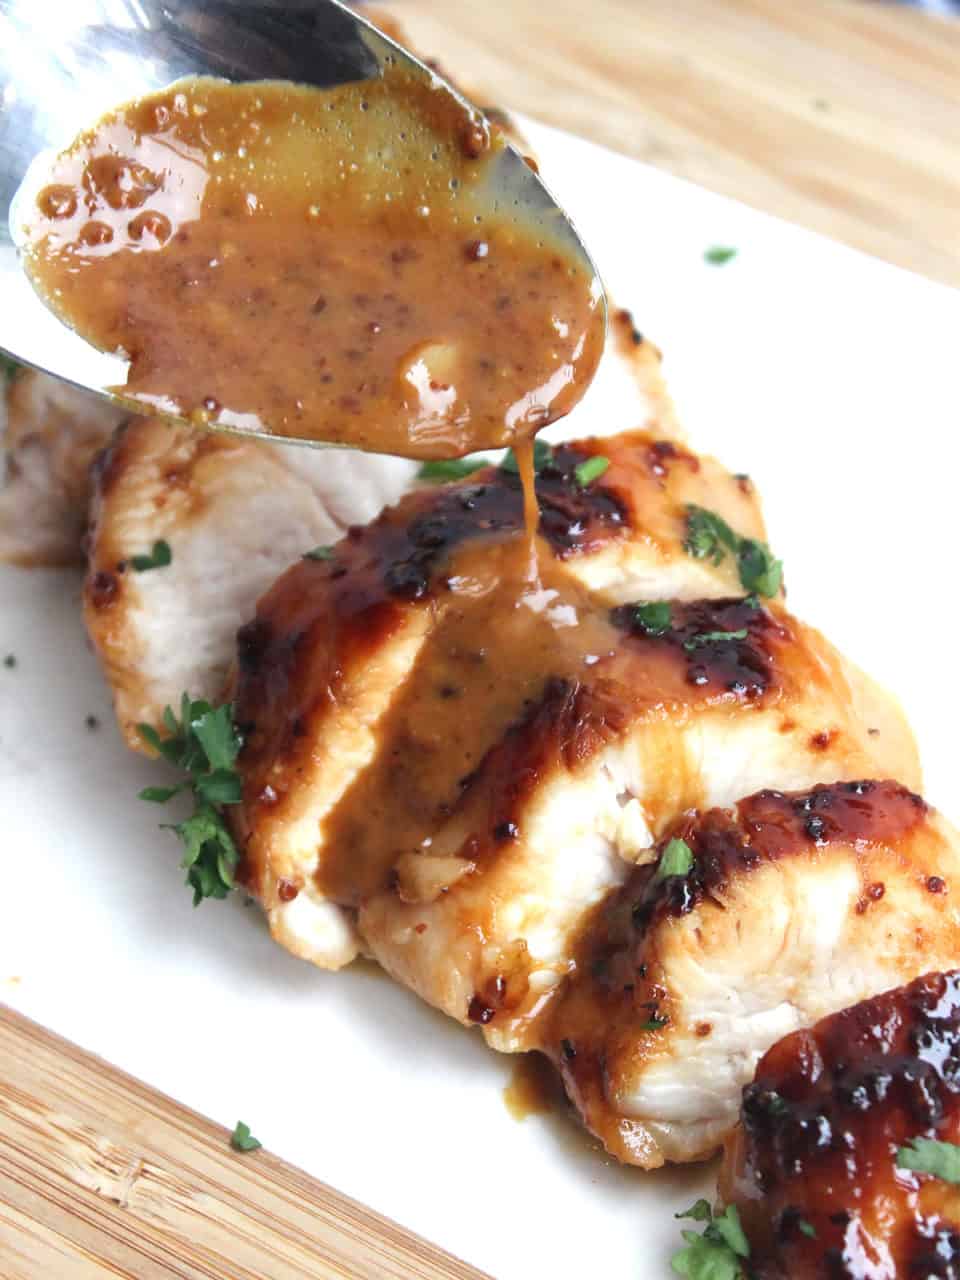 Sauce on a spoon being drizzled over the sliced chicken breast.